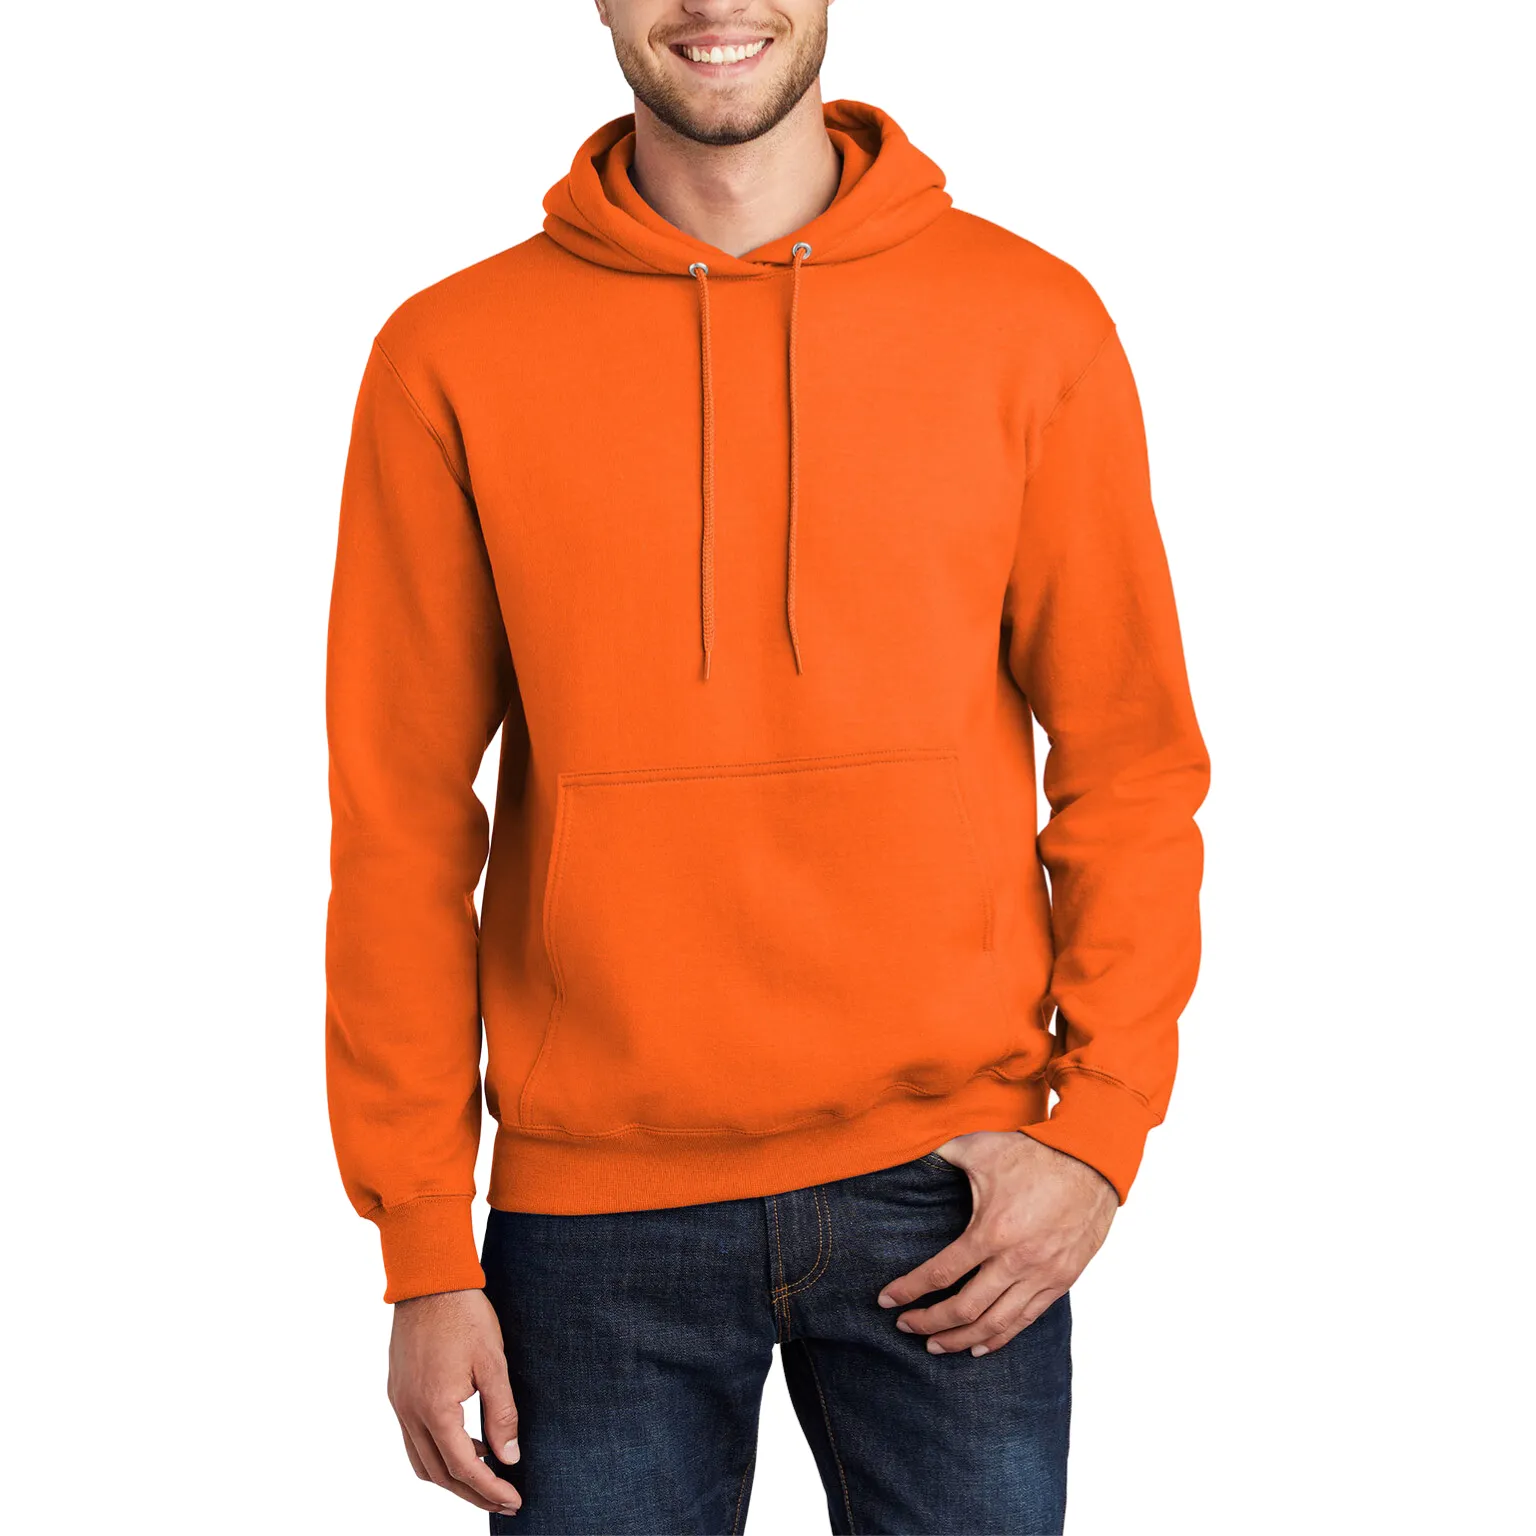 Hooded Sweatshirts manufacturing with trendy design